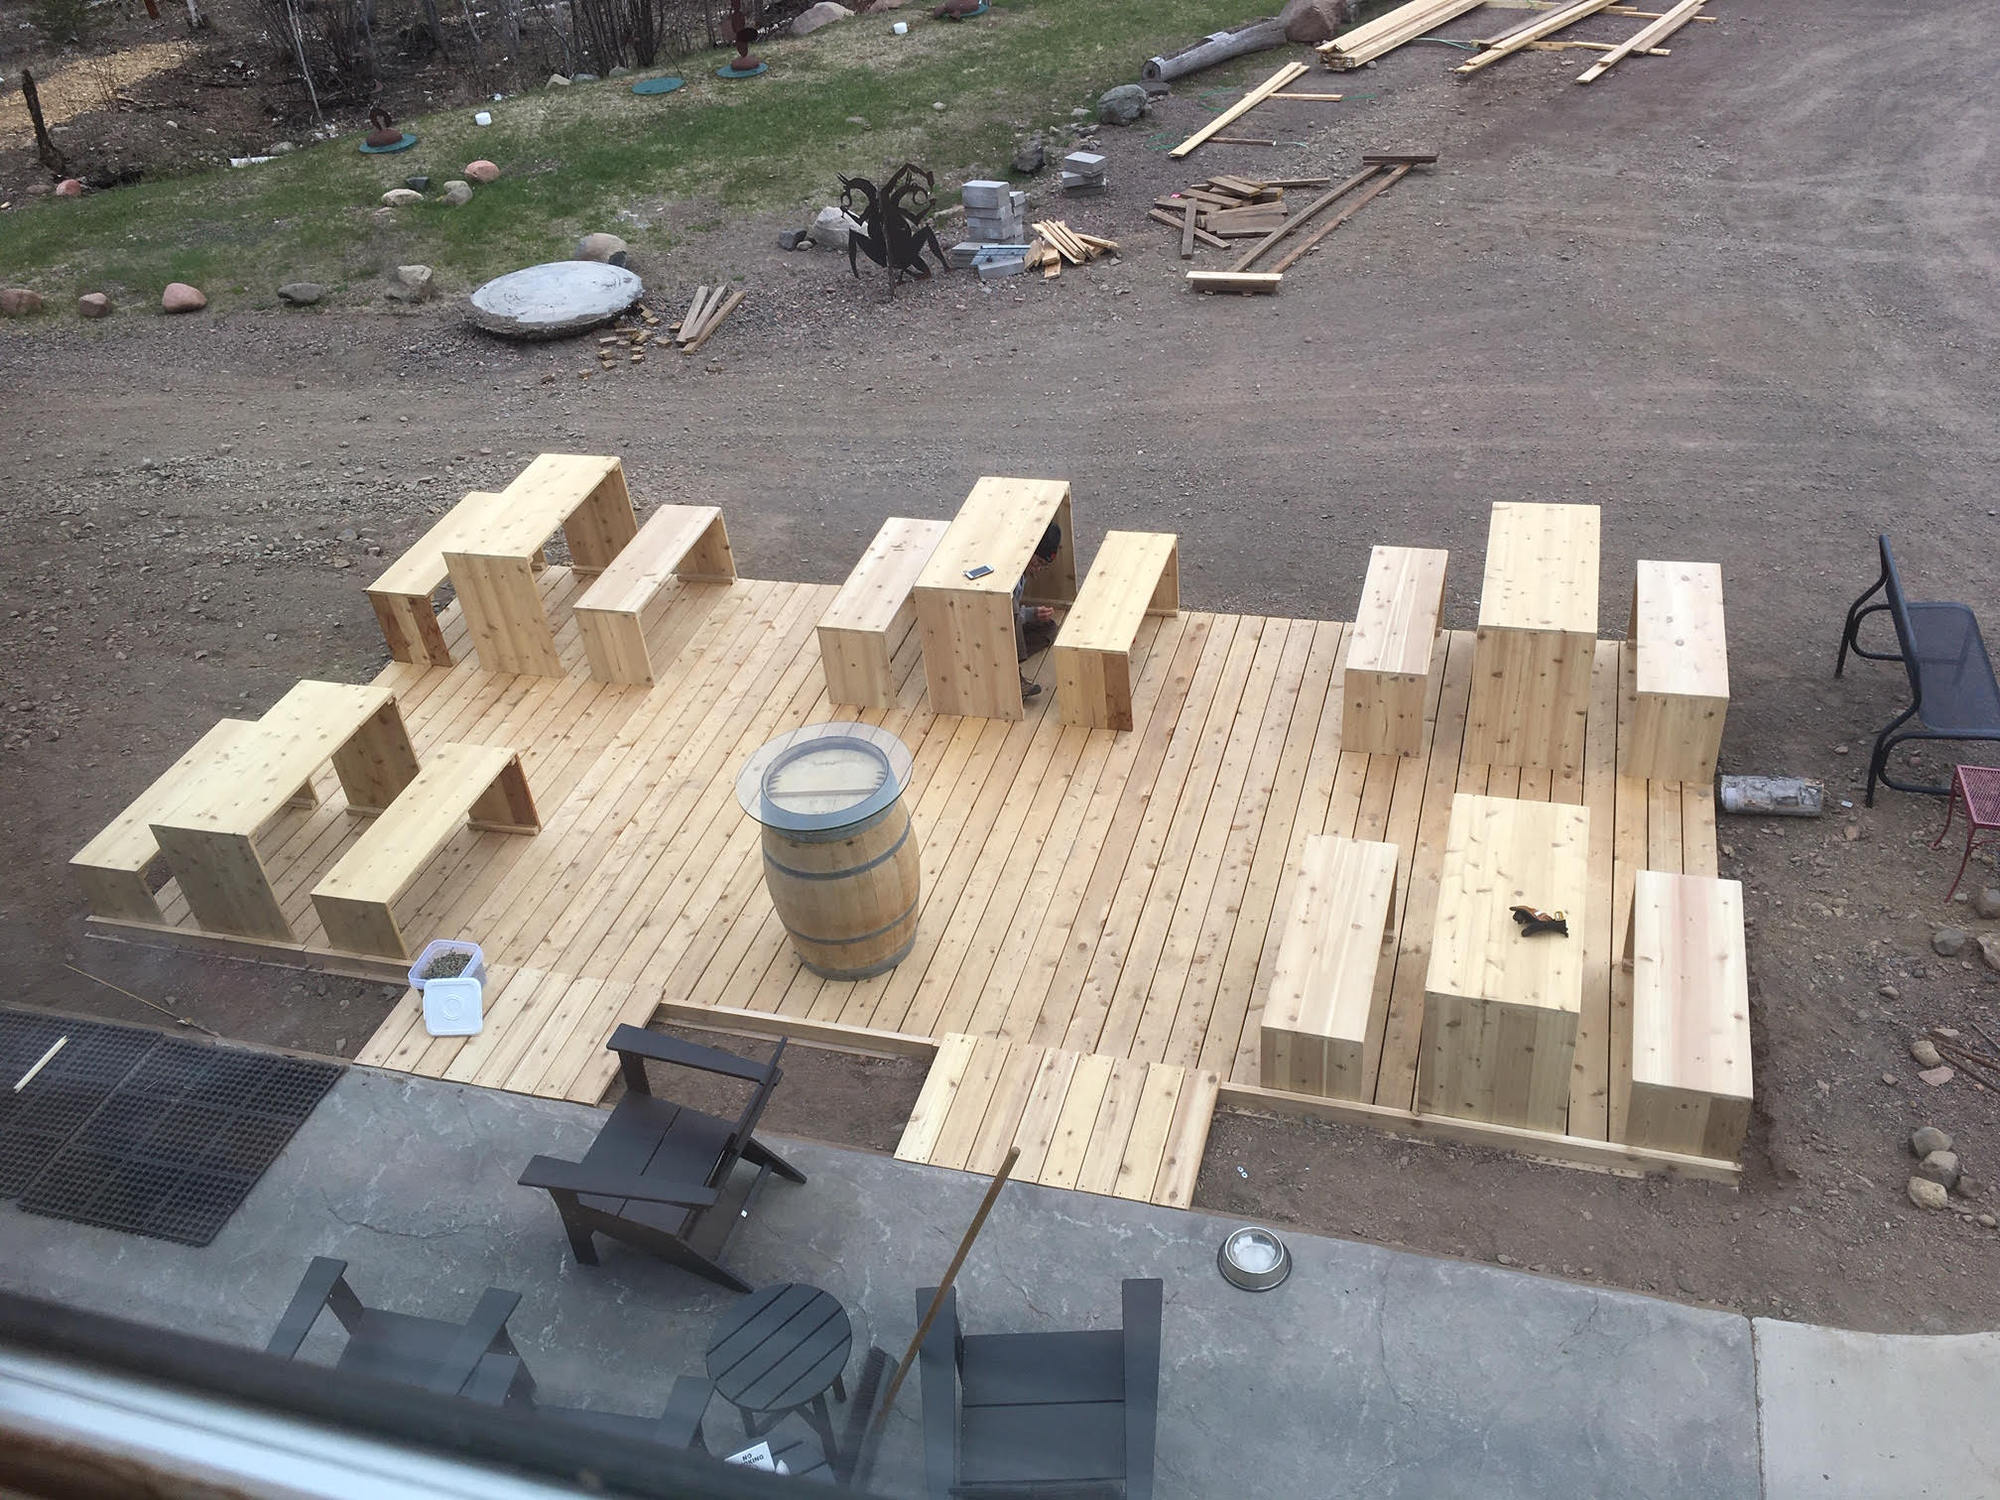 Employees at North Shore Winery in Lutsen, Minn., spent the spring constructing a new outdoor area.